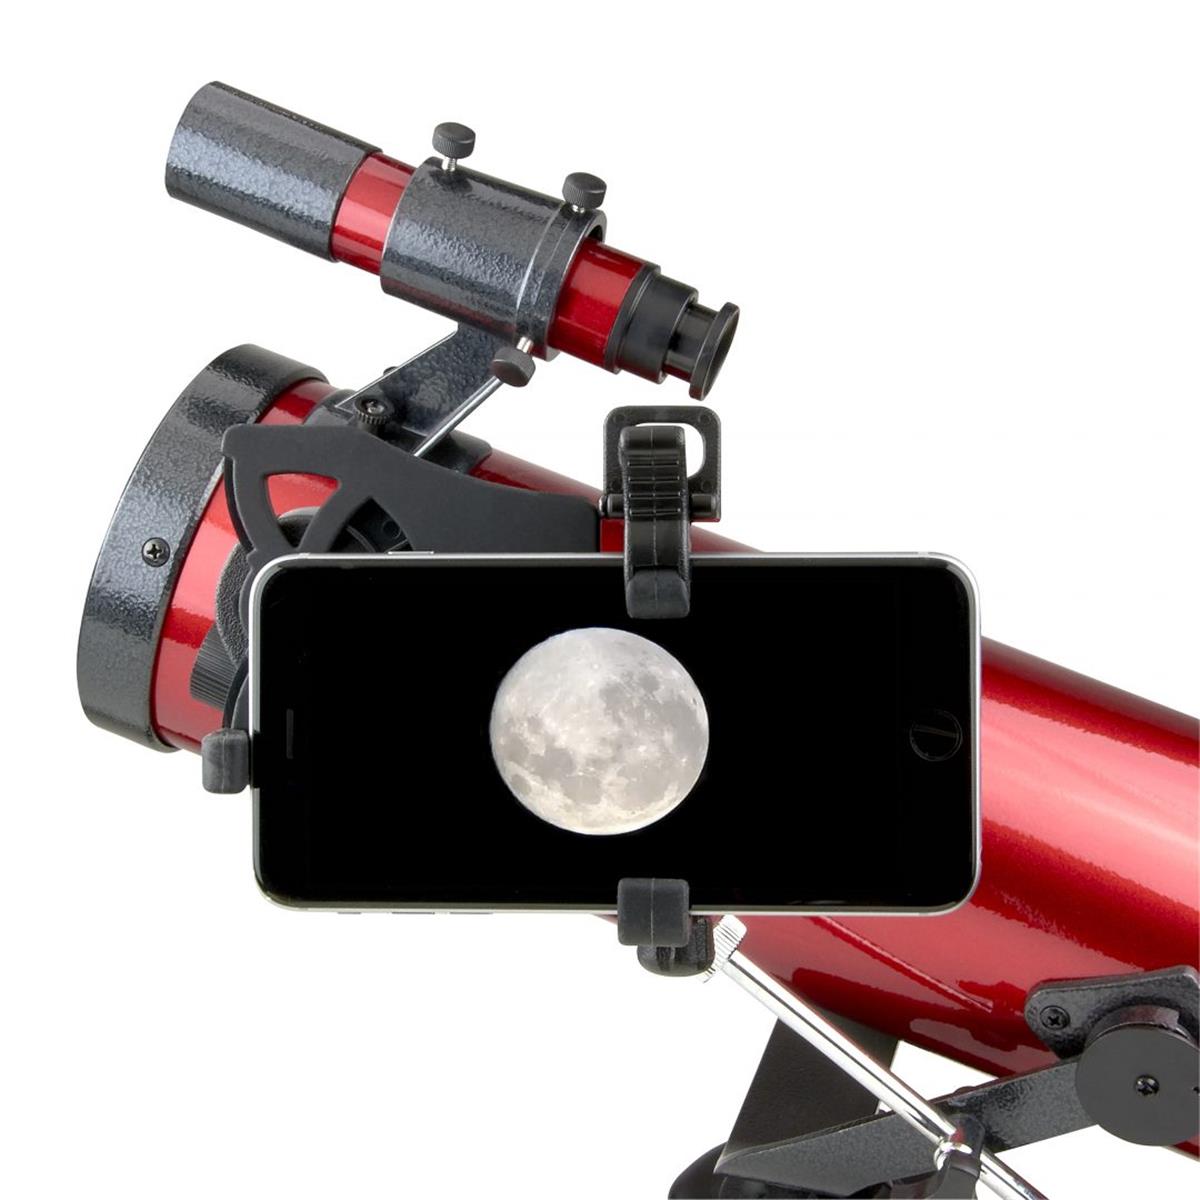 Marson Carson RP-100SP 78 x 76 mm Newtonian Reflector Telescope with Universal Smartphone Digiscoping Adapter, Red